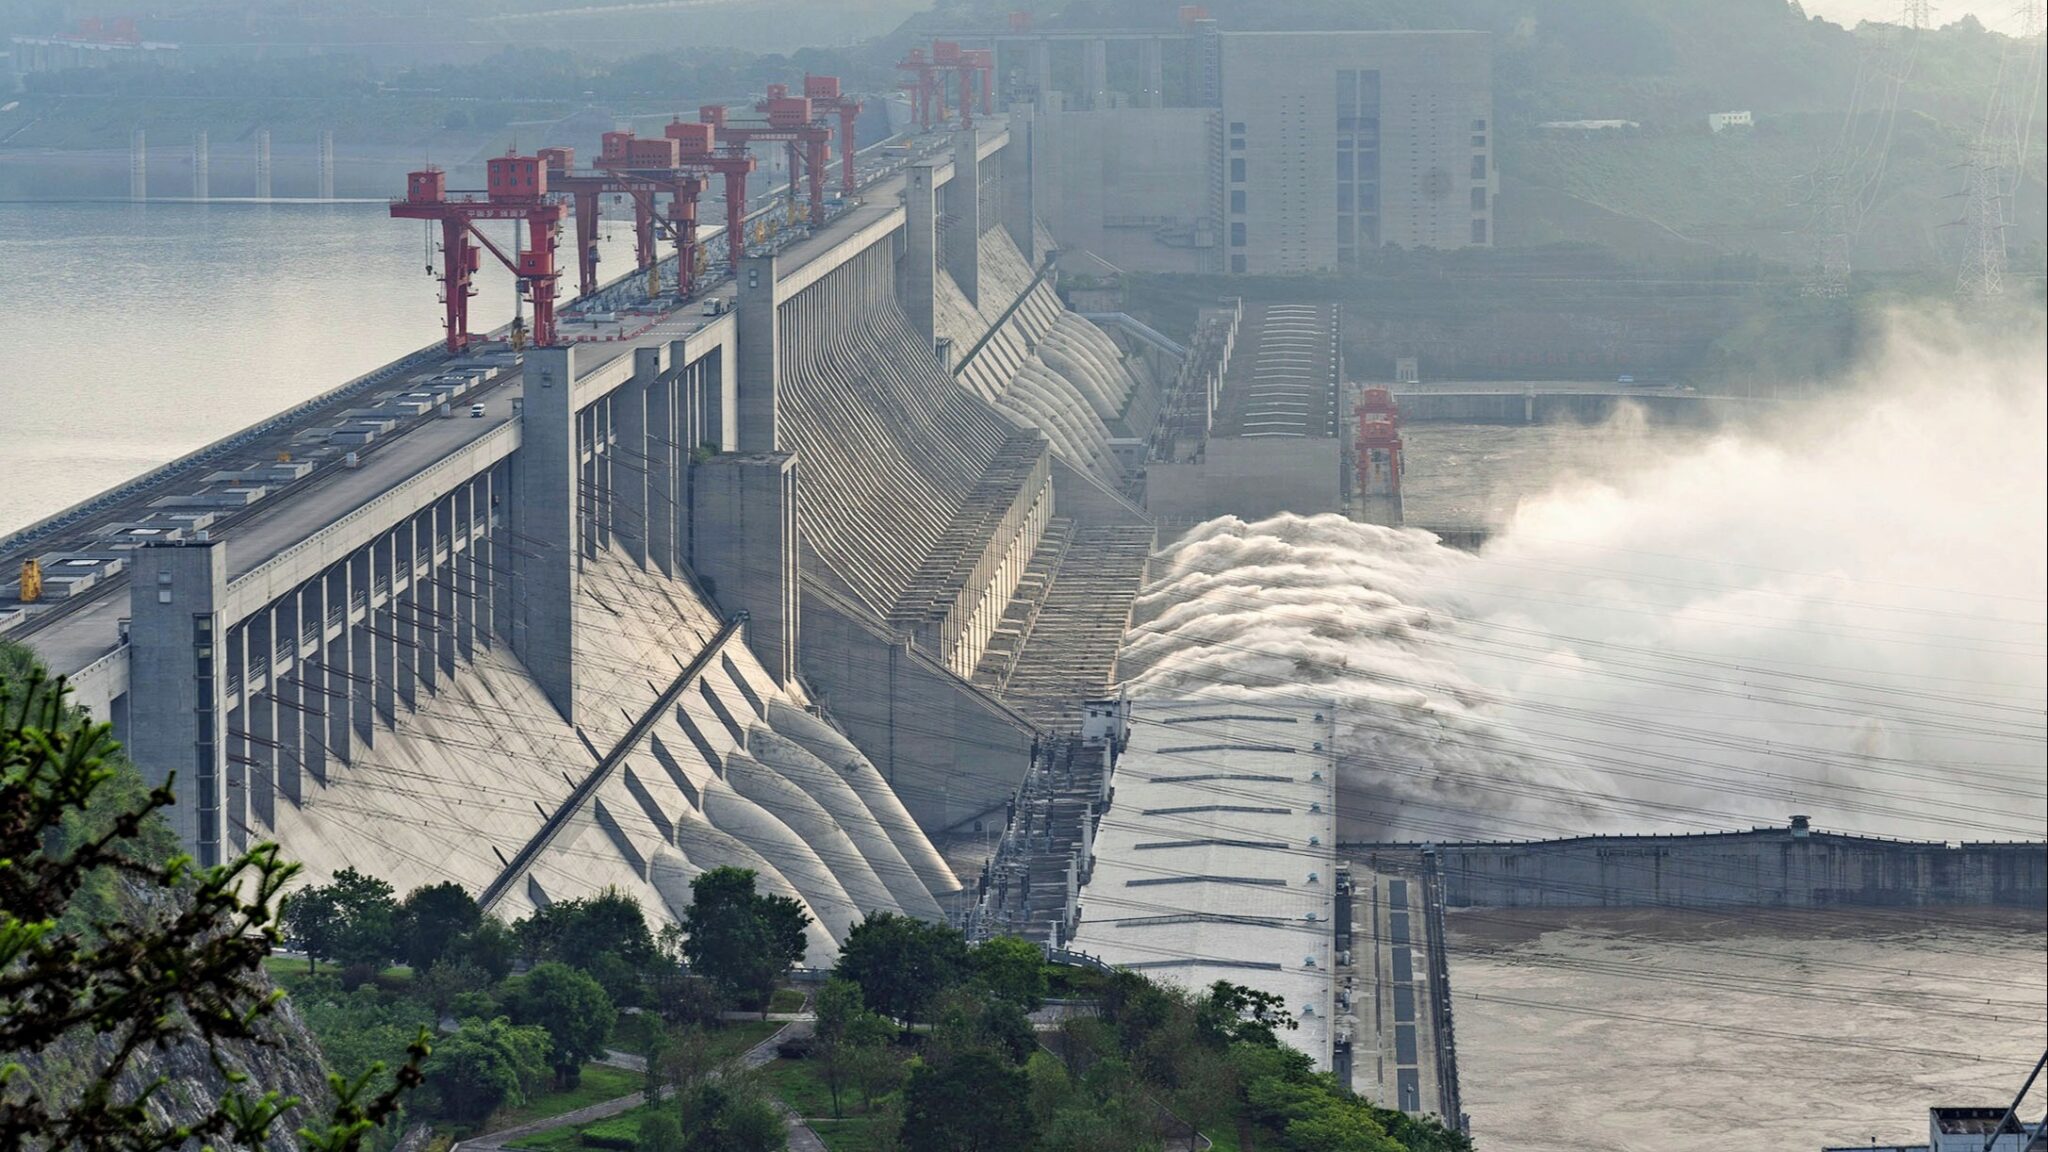 what is the largest hydroelectric dam in the world and where is the three gorges dam located in china